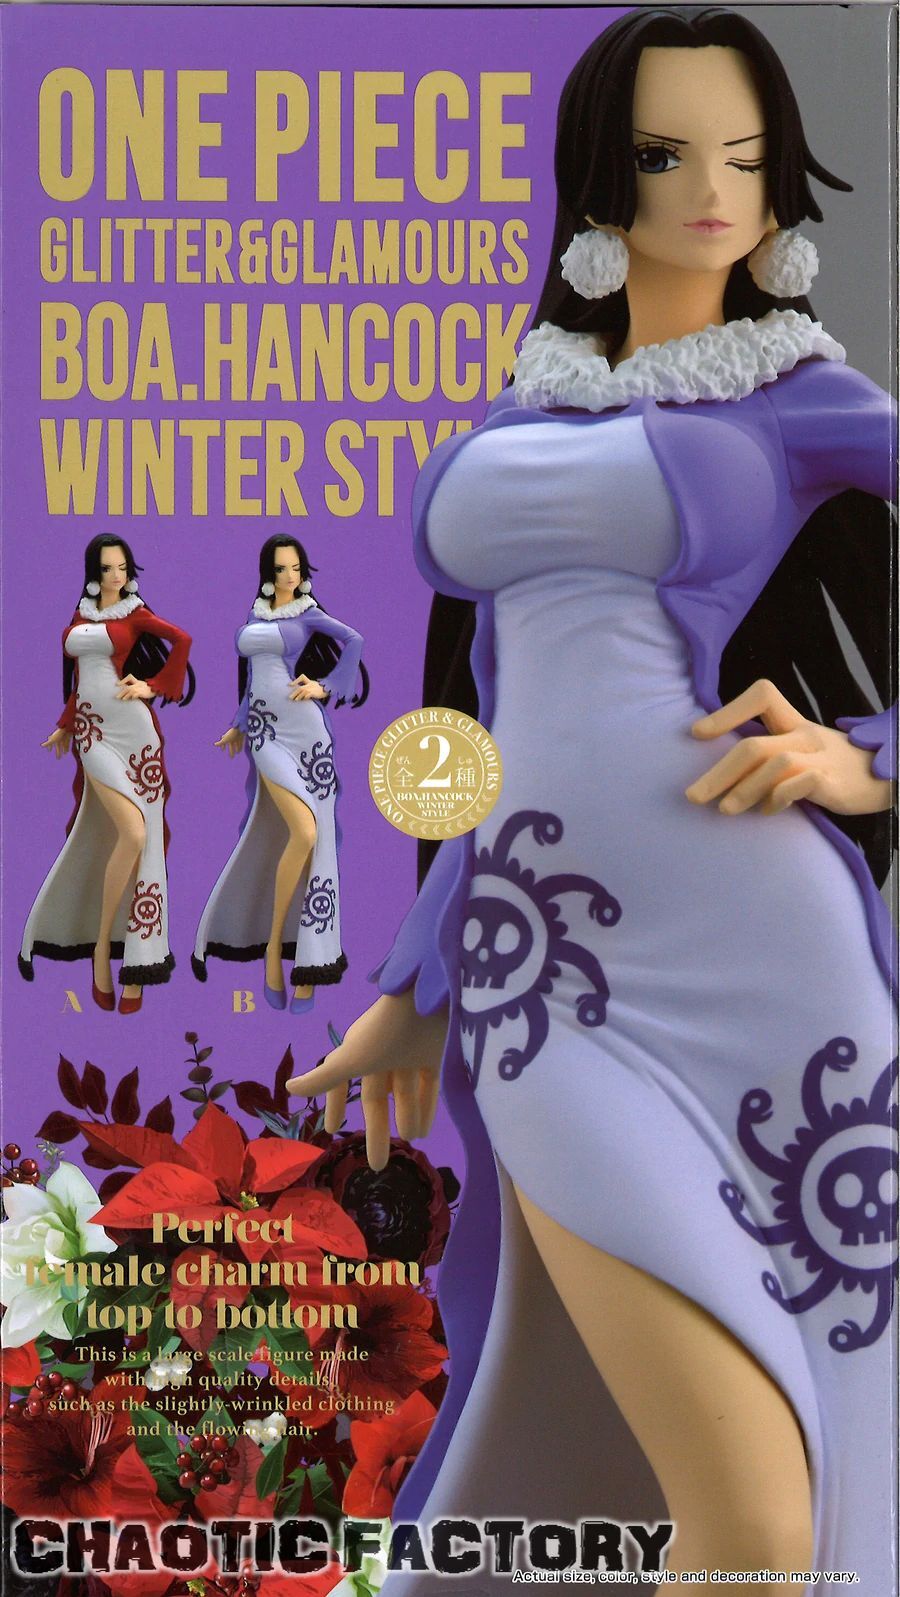 One Piece Glitter And Glamours Boa Hancock Winter Style Verb 